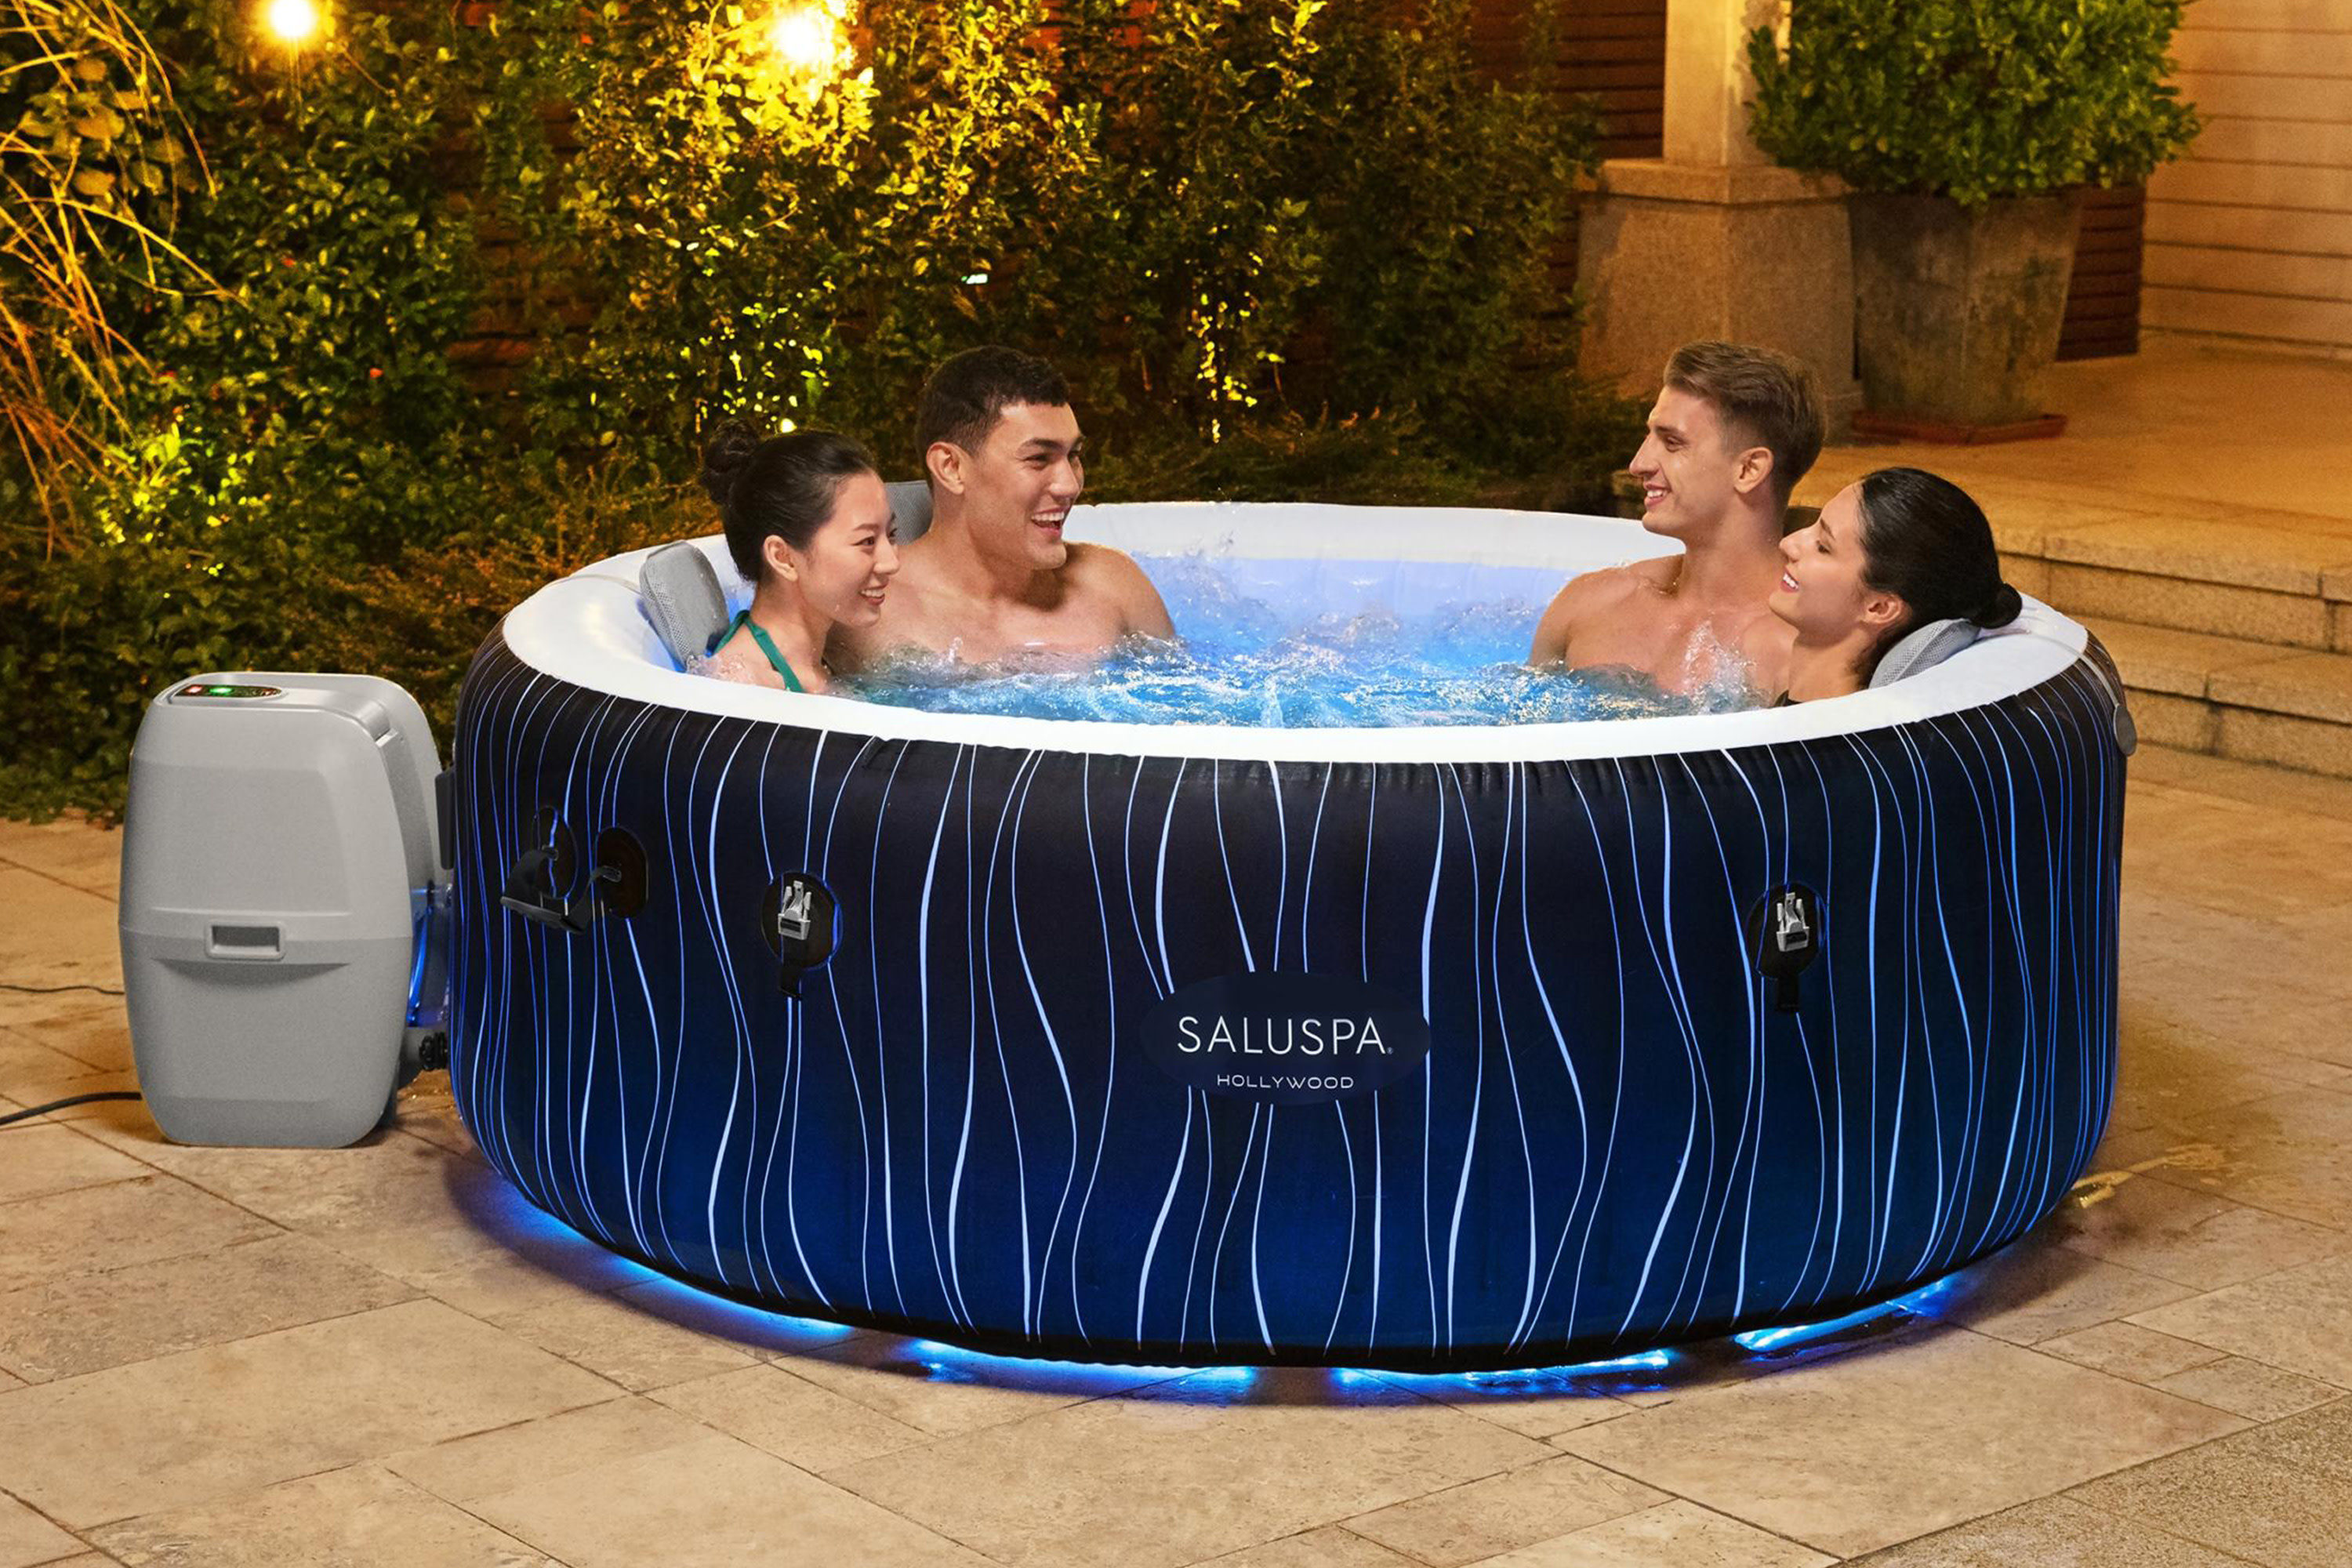 SaluSpa Hollywood AirJet Inflatable Hot Tub Spa Color-Changing LED 4-6 Person $298 @ walmart